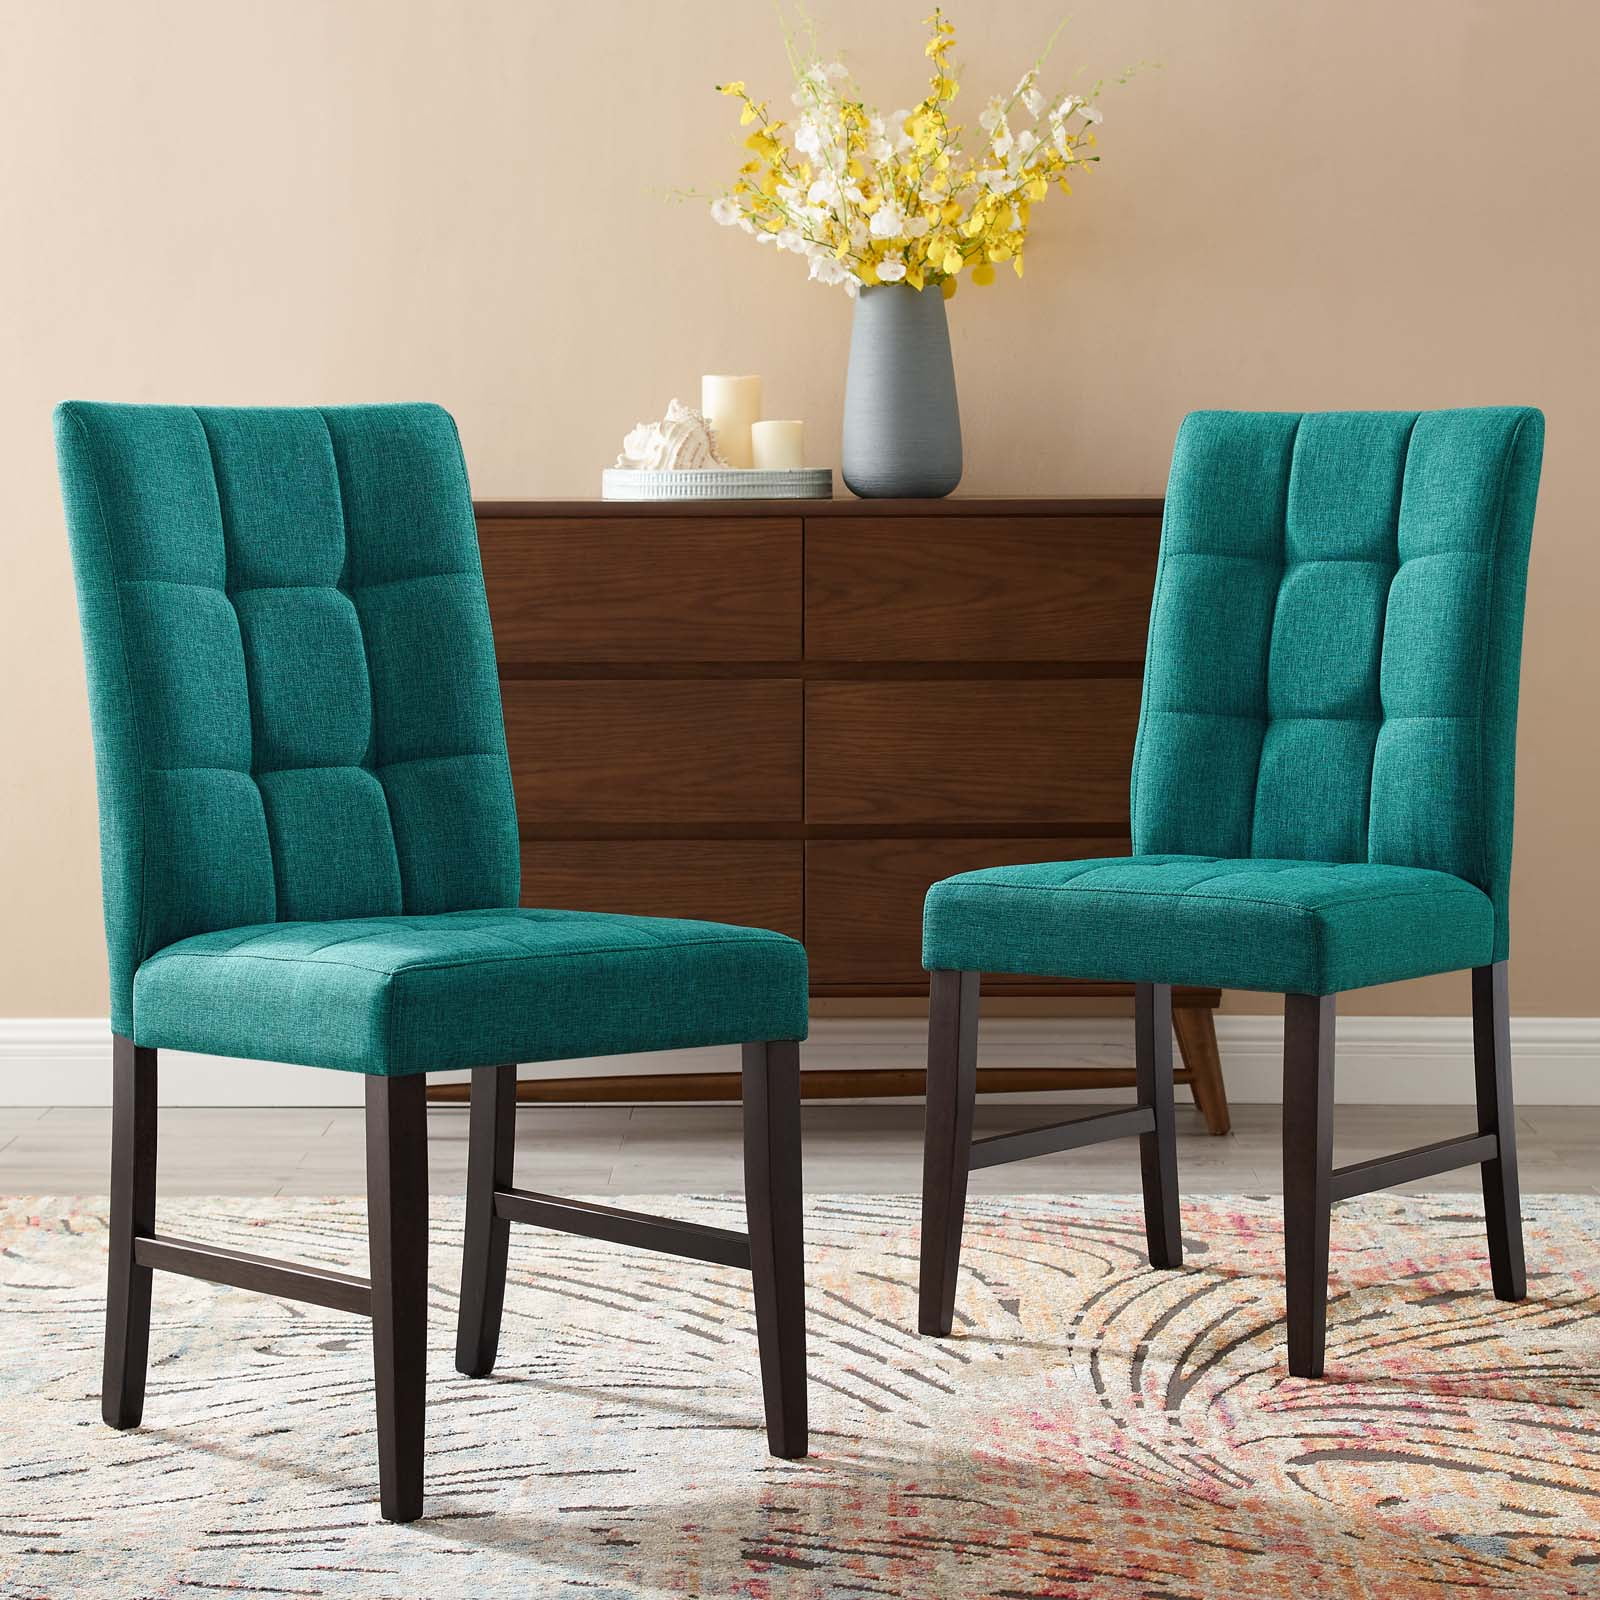 Promulgate Biscuit Tufted Upholstered Fabric Dining Side Chair in Teal